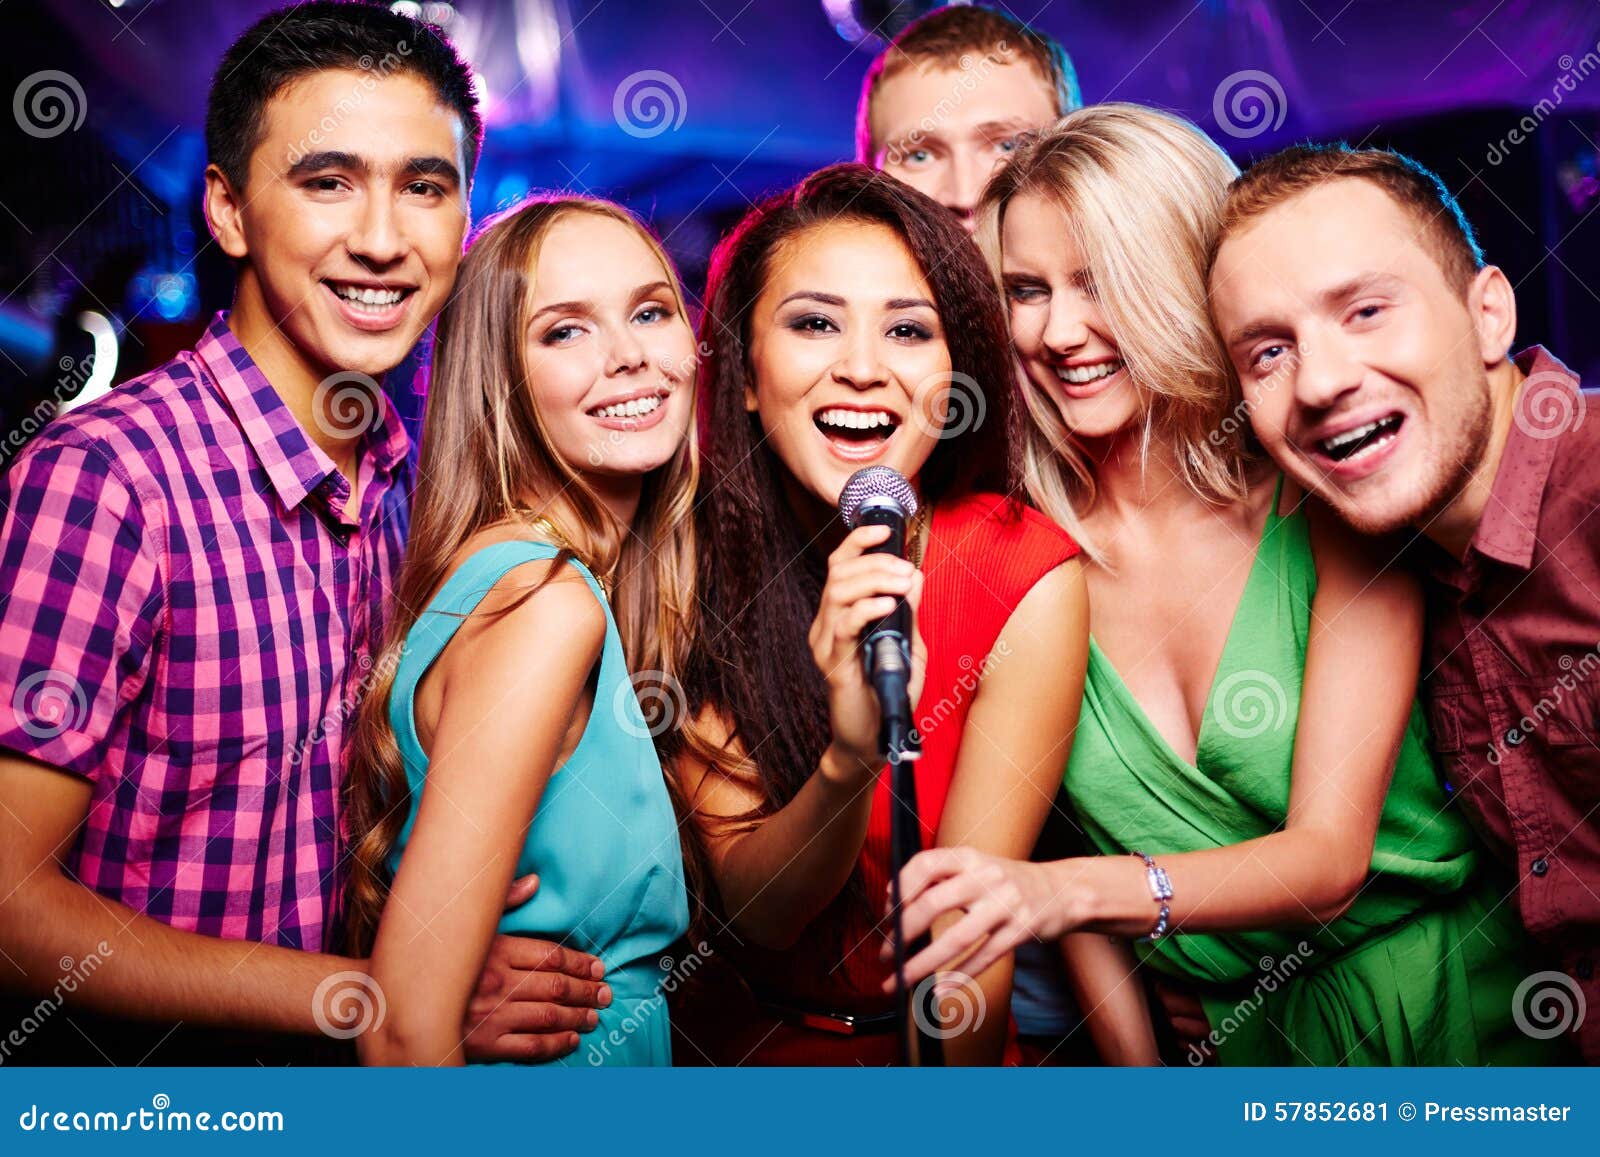 Singing together stock image. Image of happy, looking - 57852681